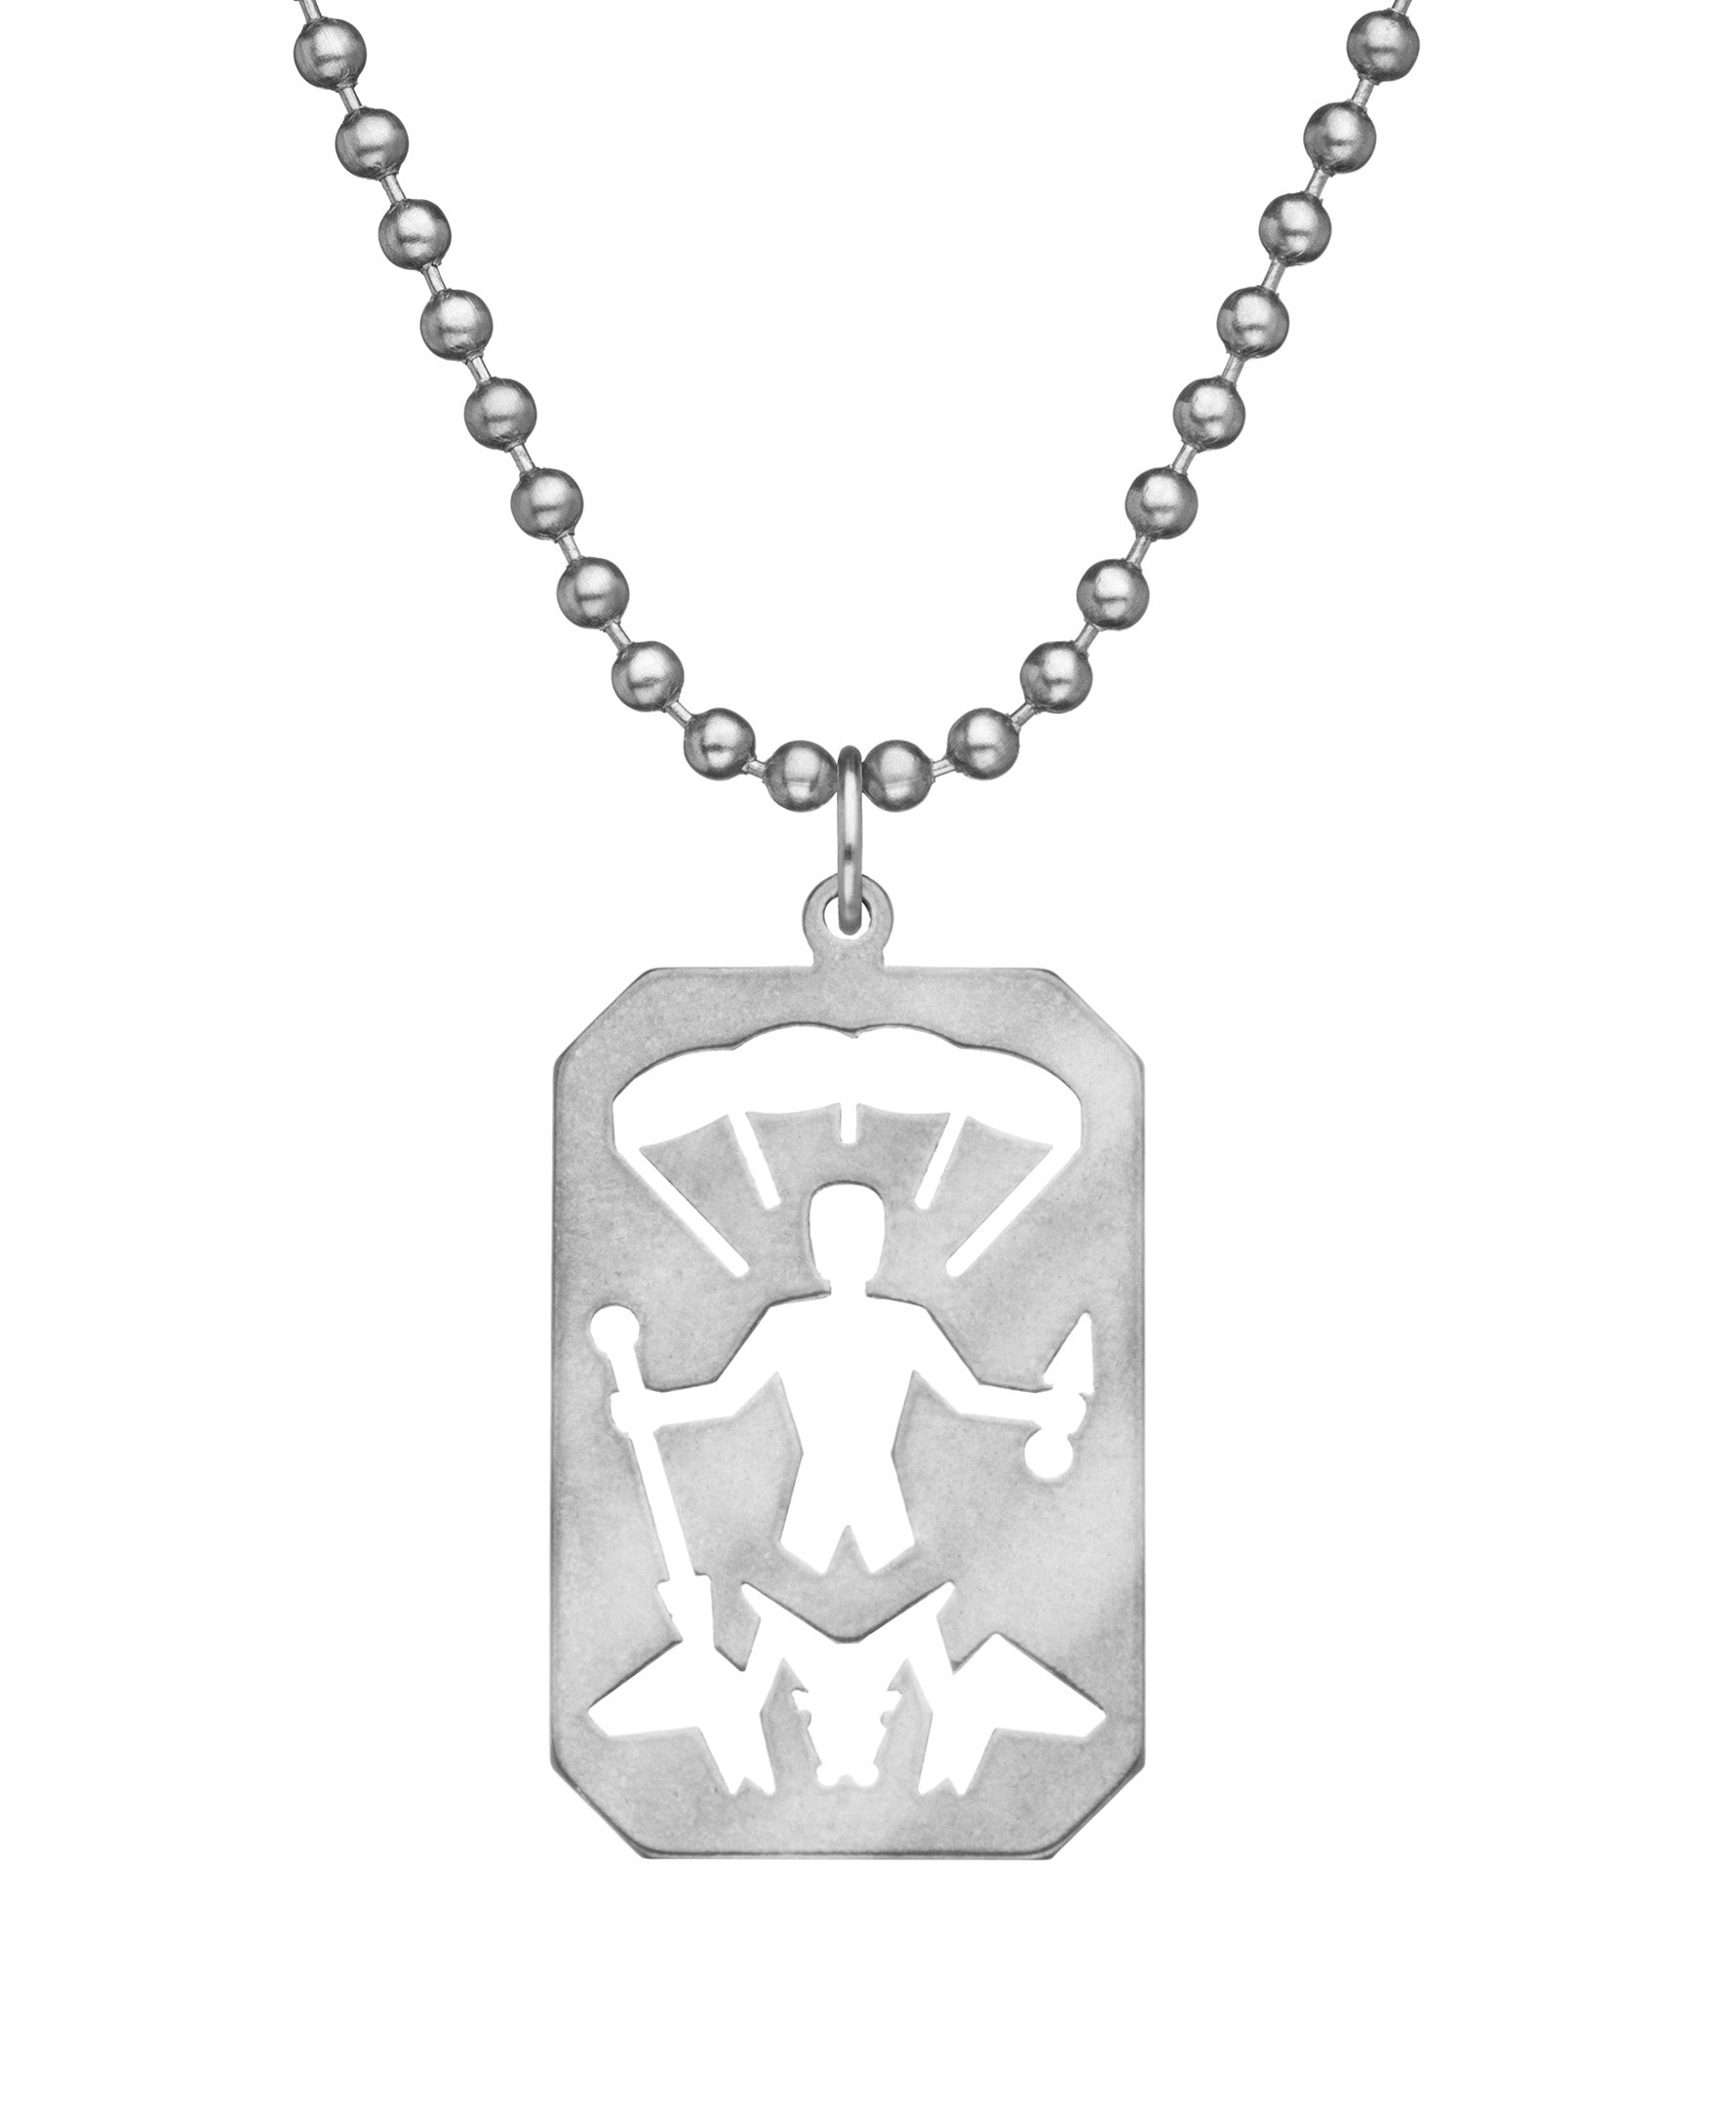 Genuine U.S. Military Issue St. Michael Necklace with Dog Tag Chain